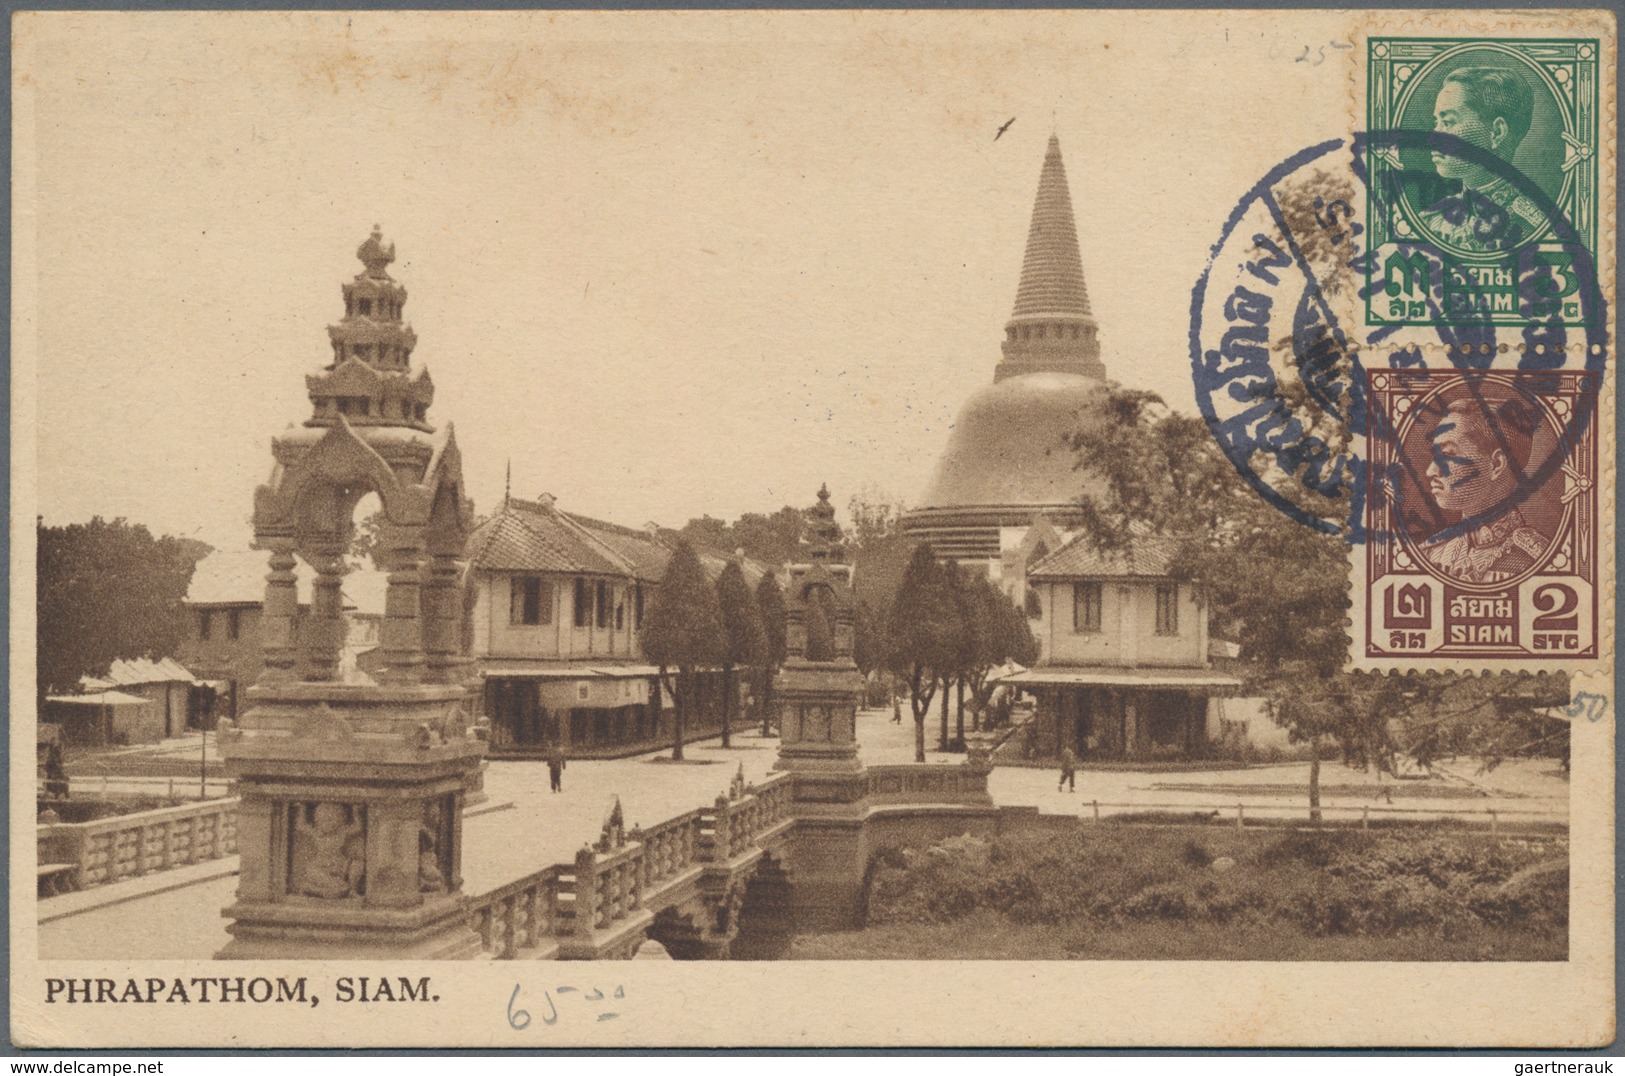 Thailand: 1901/1923, 42 old picture postcards , 25 of them franked with overseas destinations and so